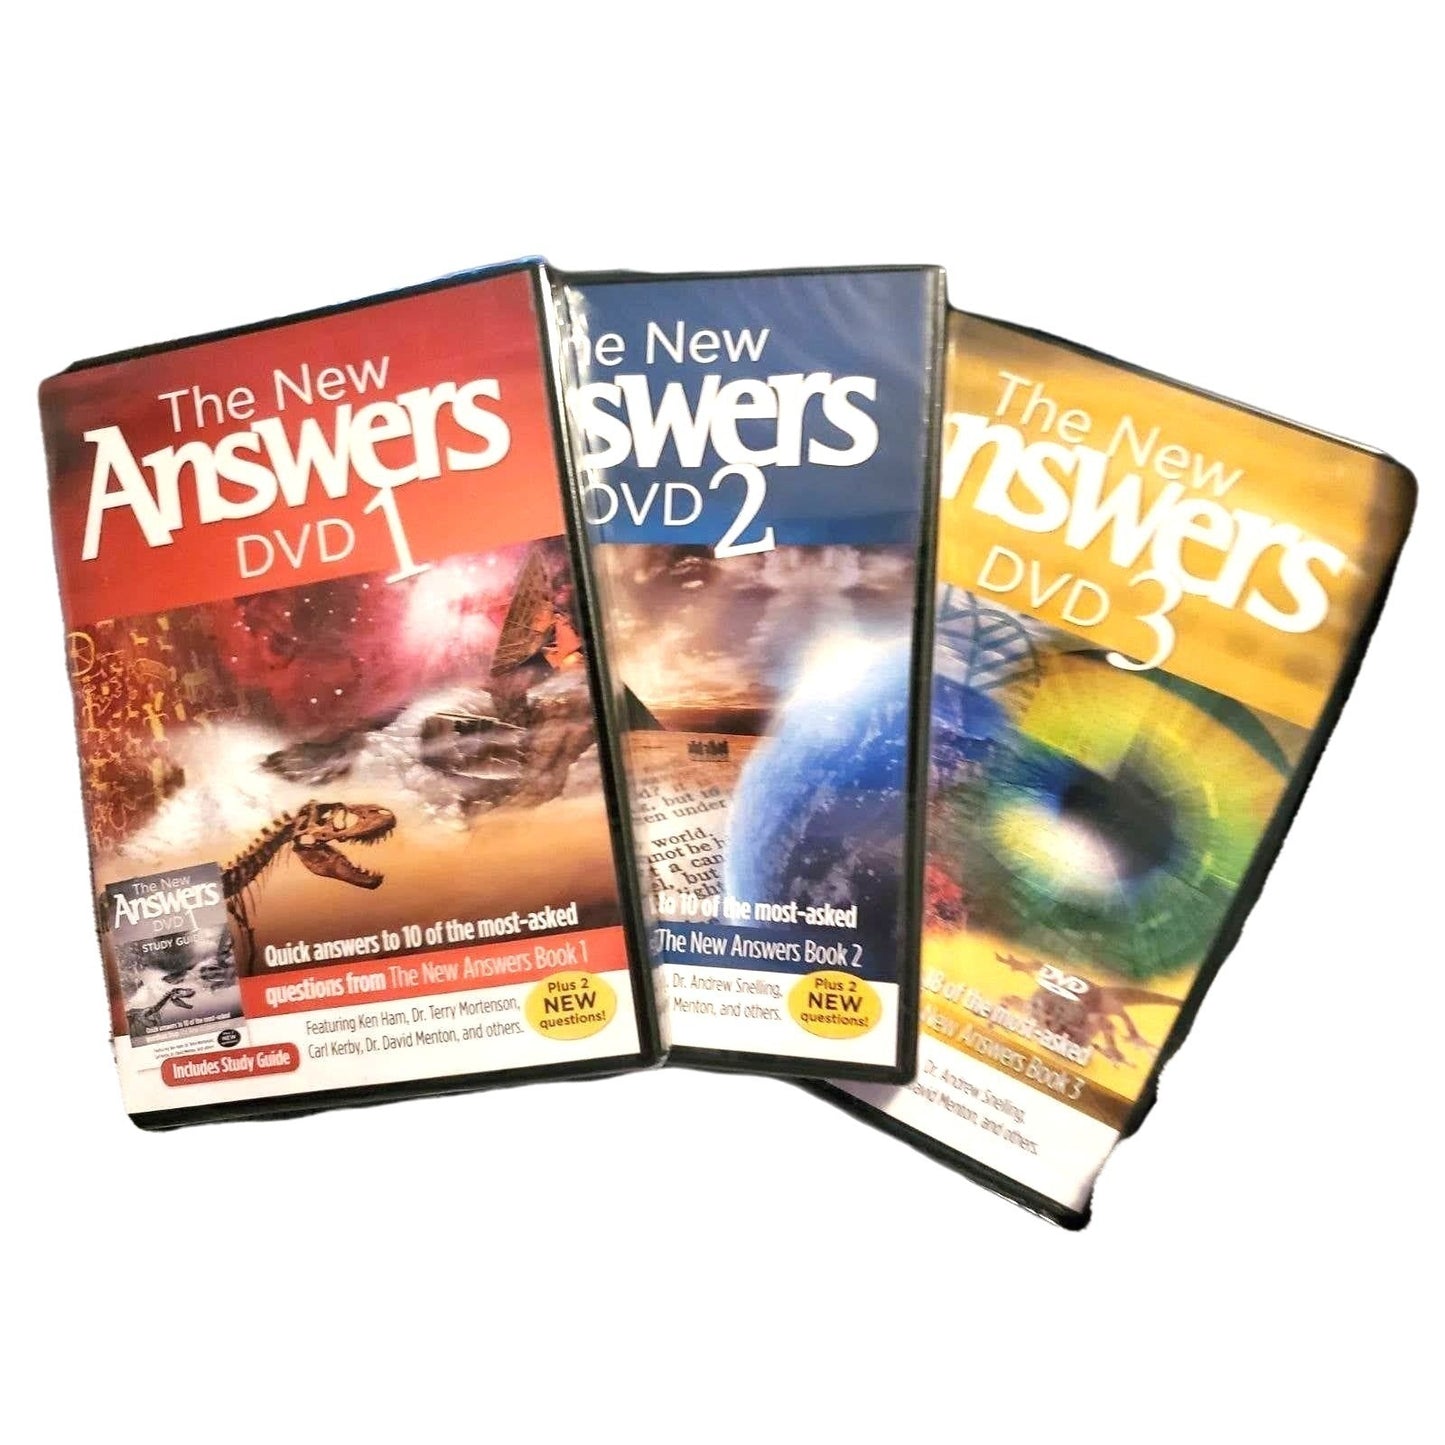 Bible Religious DVD Set 3 THE NEW ANSWERS children education